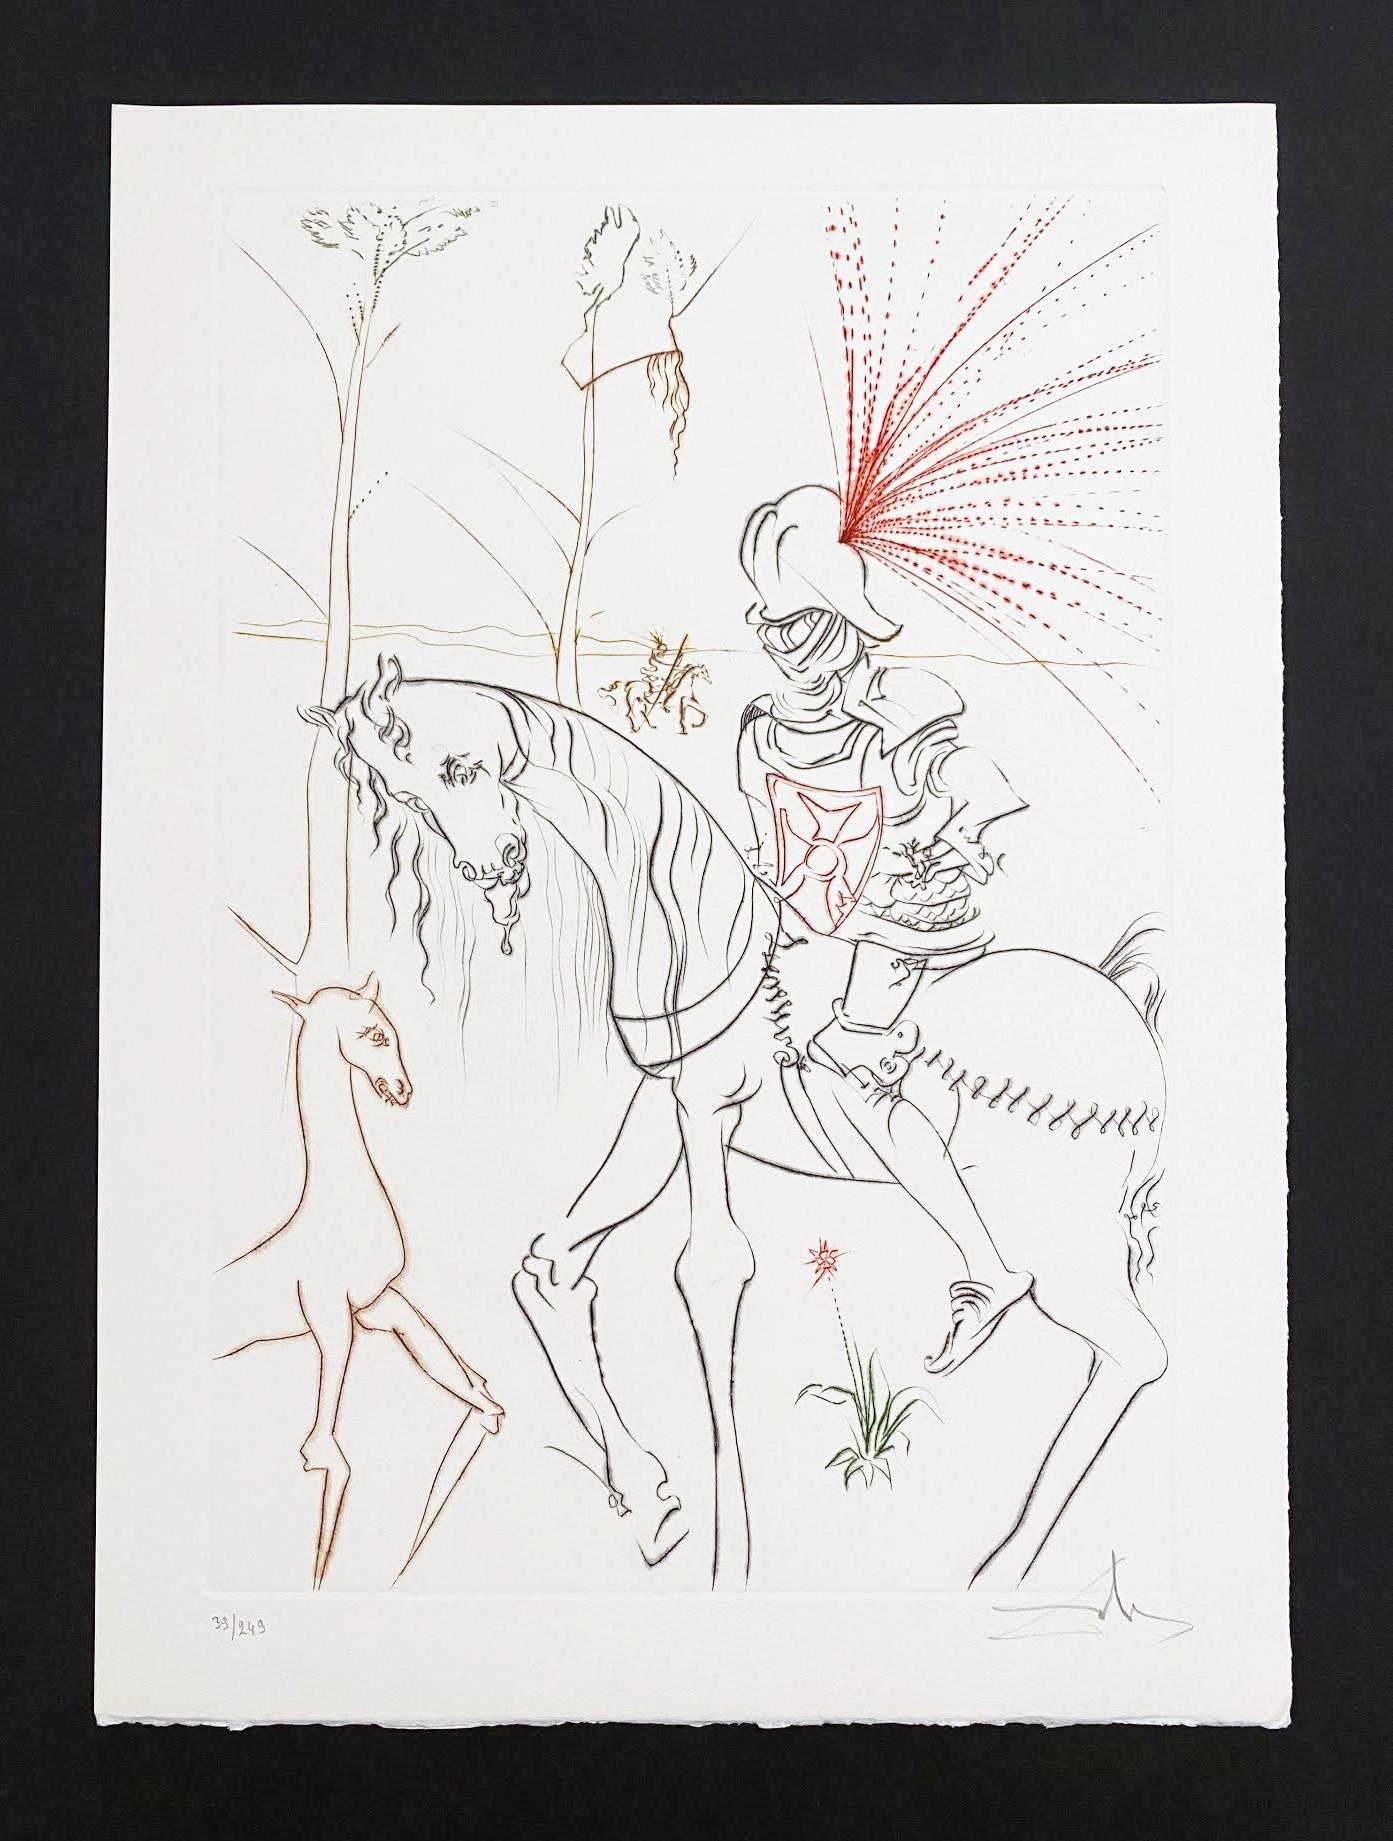 Salvador Dali The Quest for the Grail The Bloody Ford
Artist: Salvador Dali
Medium: Medium Drypoint on Arches
Title: The Bloody Ford
Portfolio: The Quest for the Grail
Year: 1975
Edition: 39/249
Signed: Signed and numbered in pencil
Image Size: 15